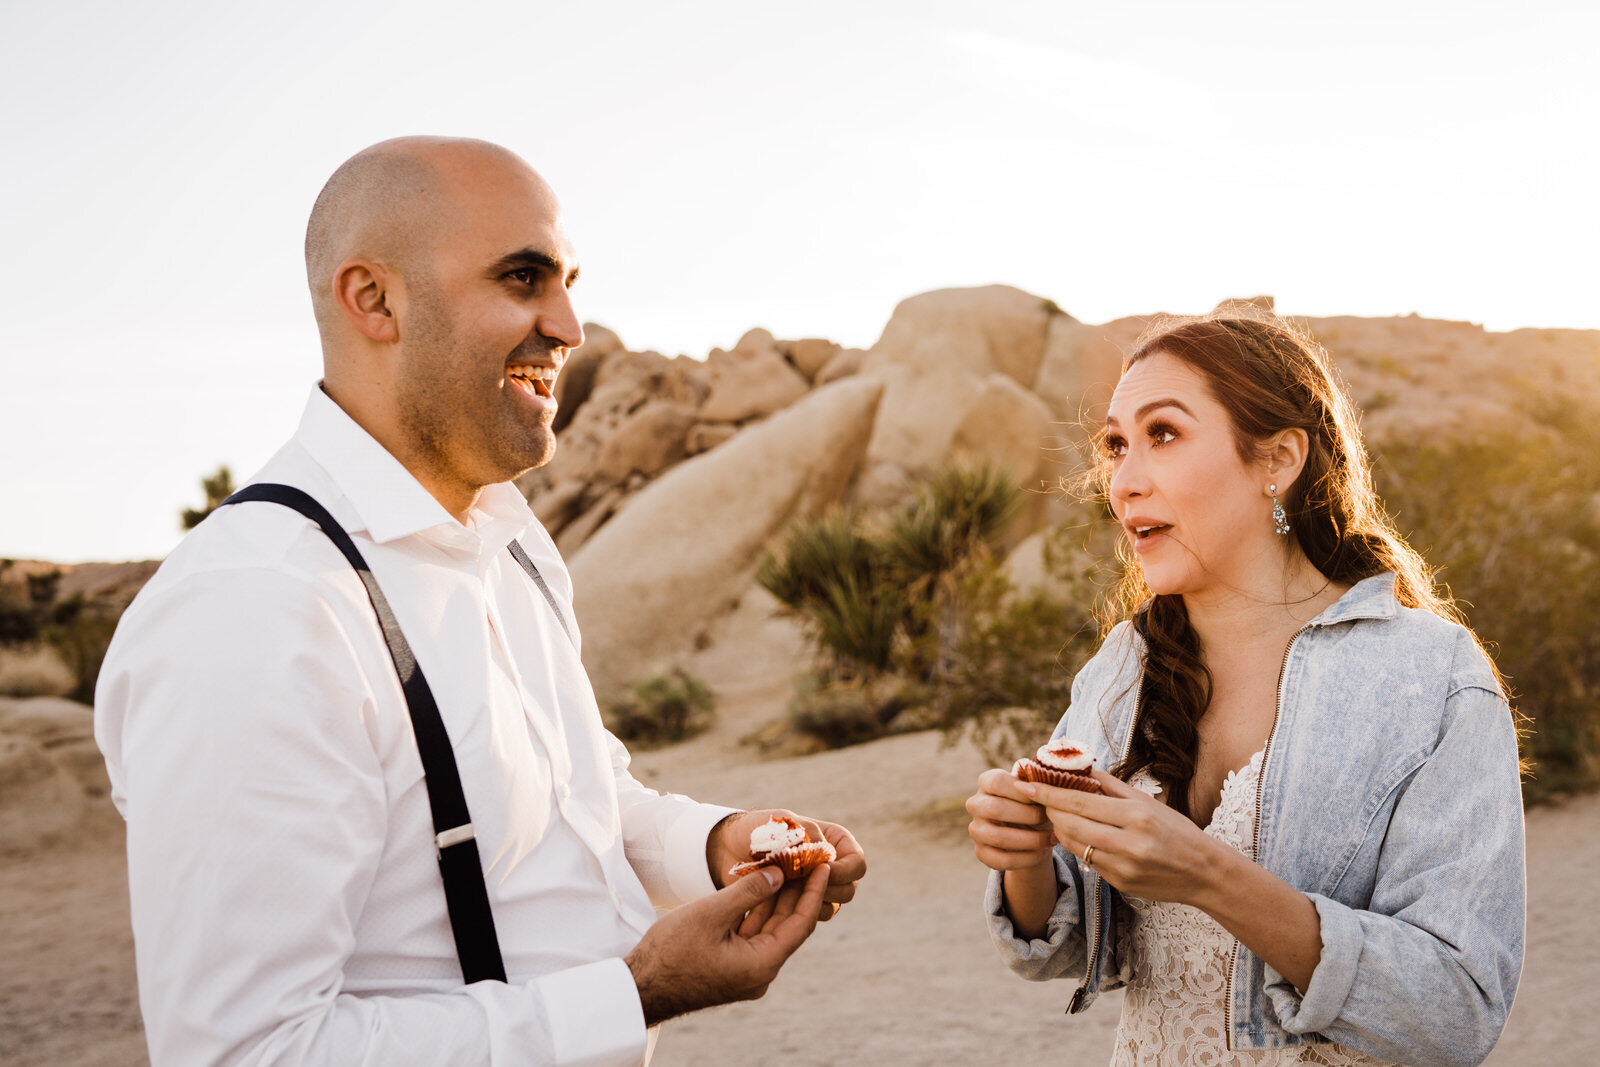 bride-and-groom-eat-cupcakes-after-eloping-in-joshua-tree-national-park.jpg